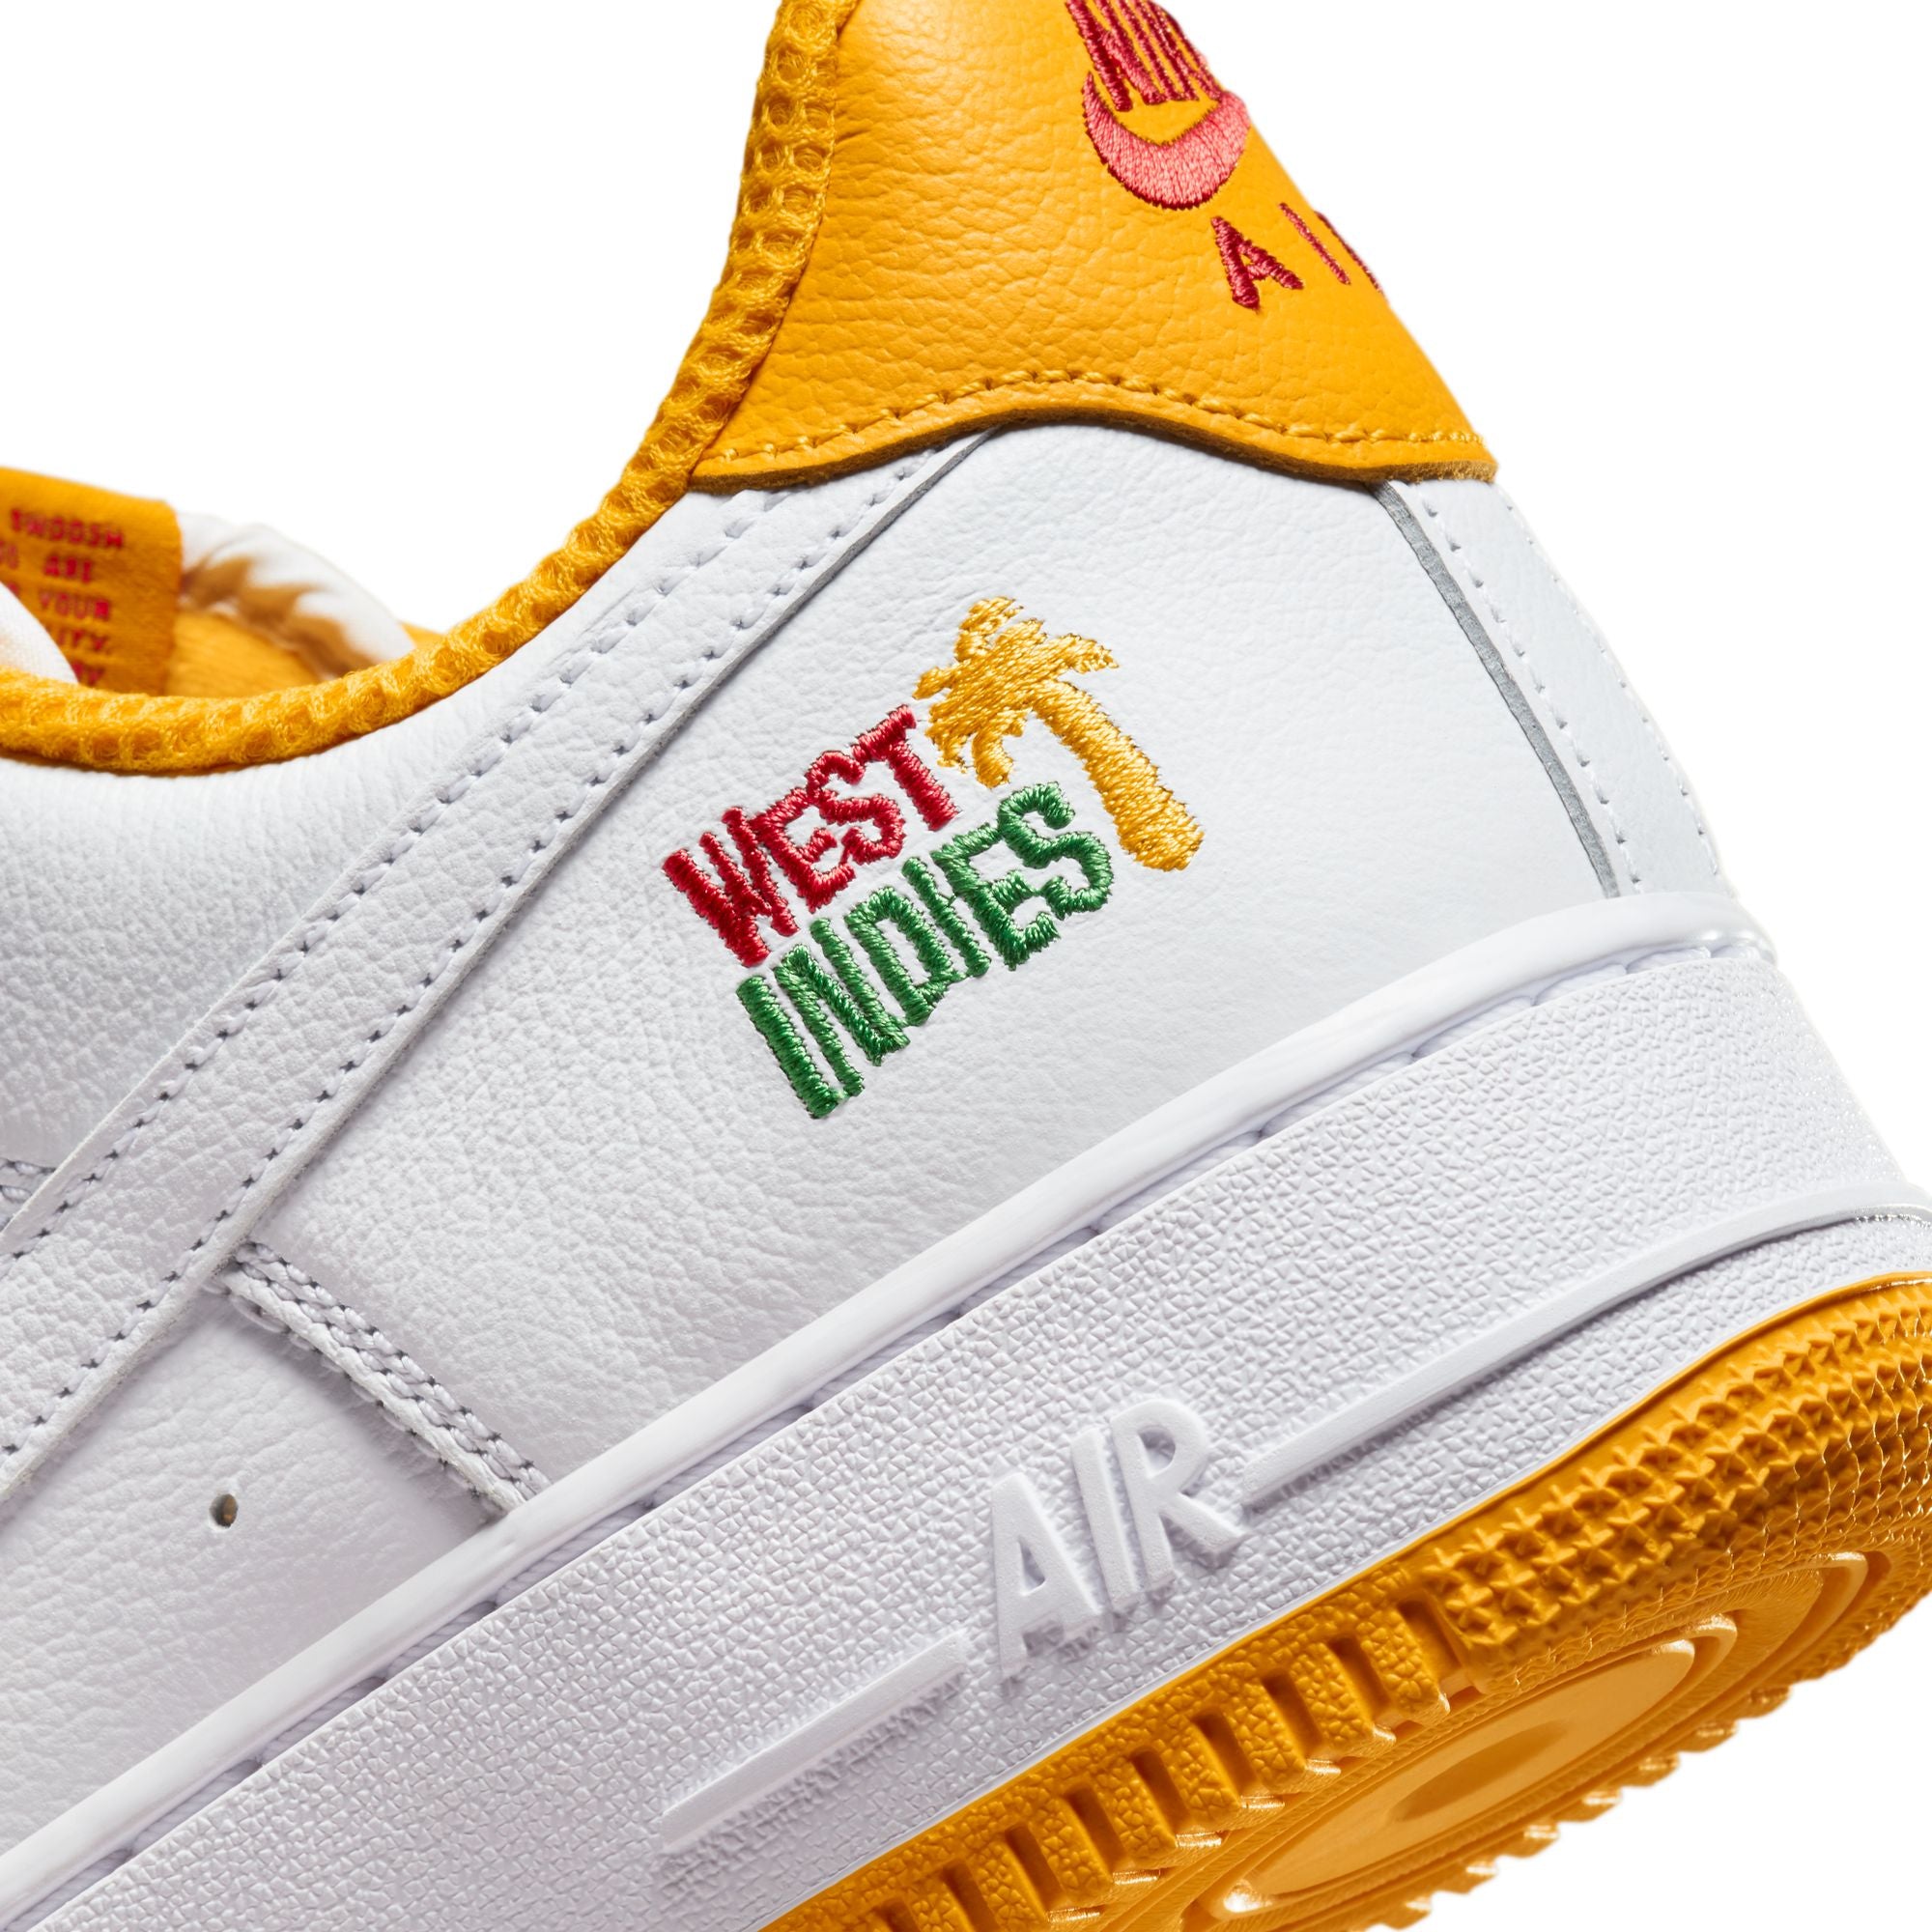 Nike Air Force 1 Low Retro QS 'West Indies'